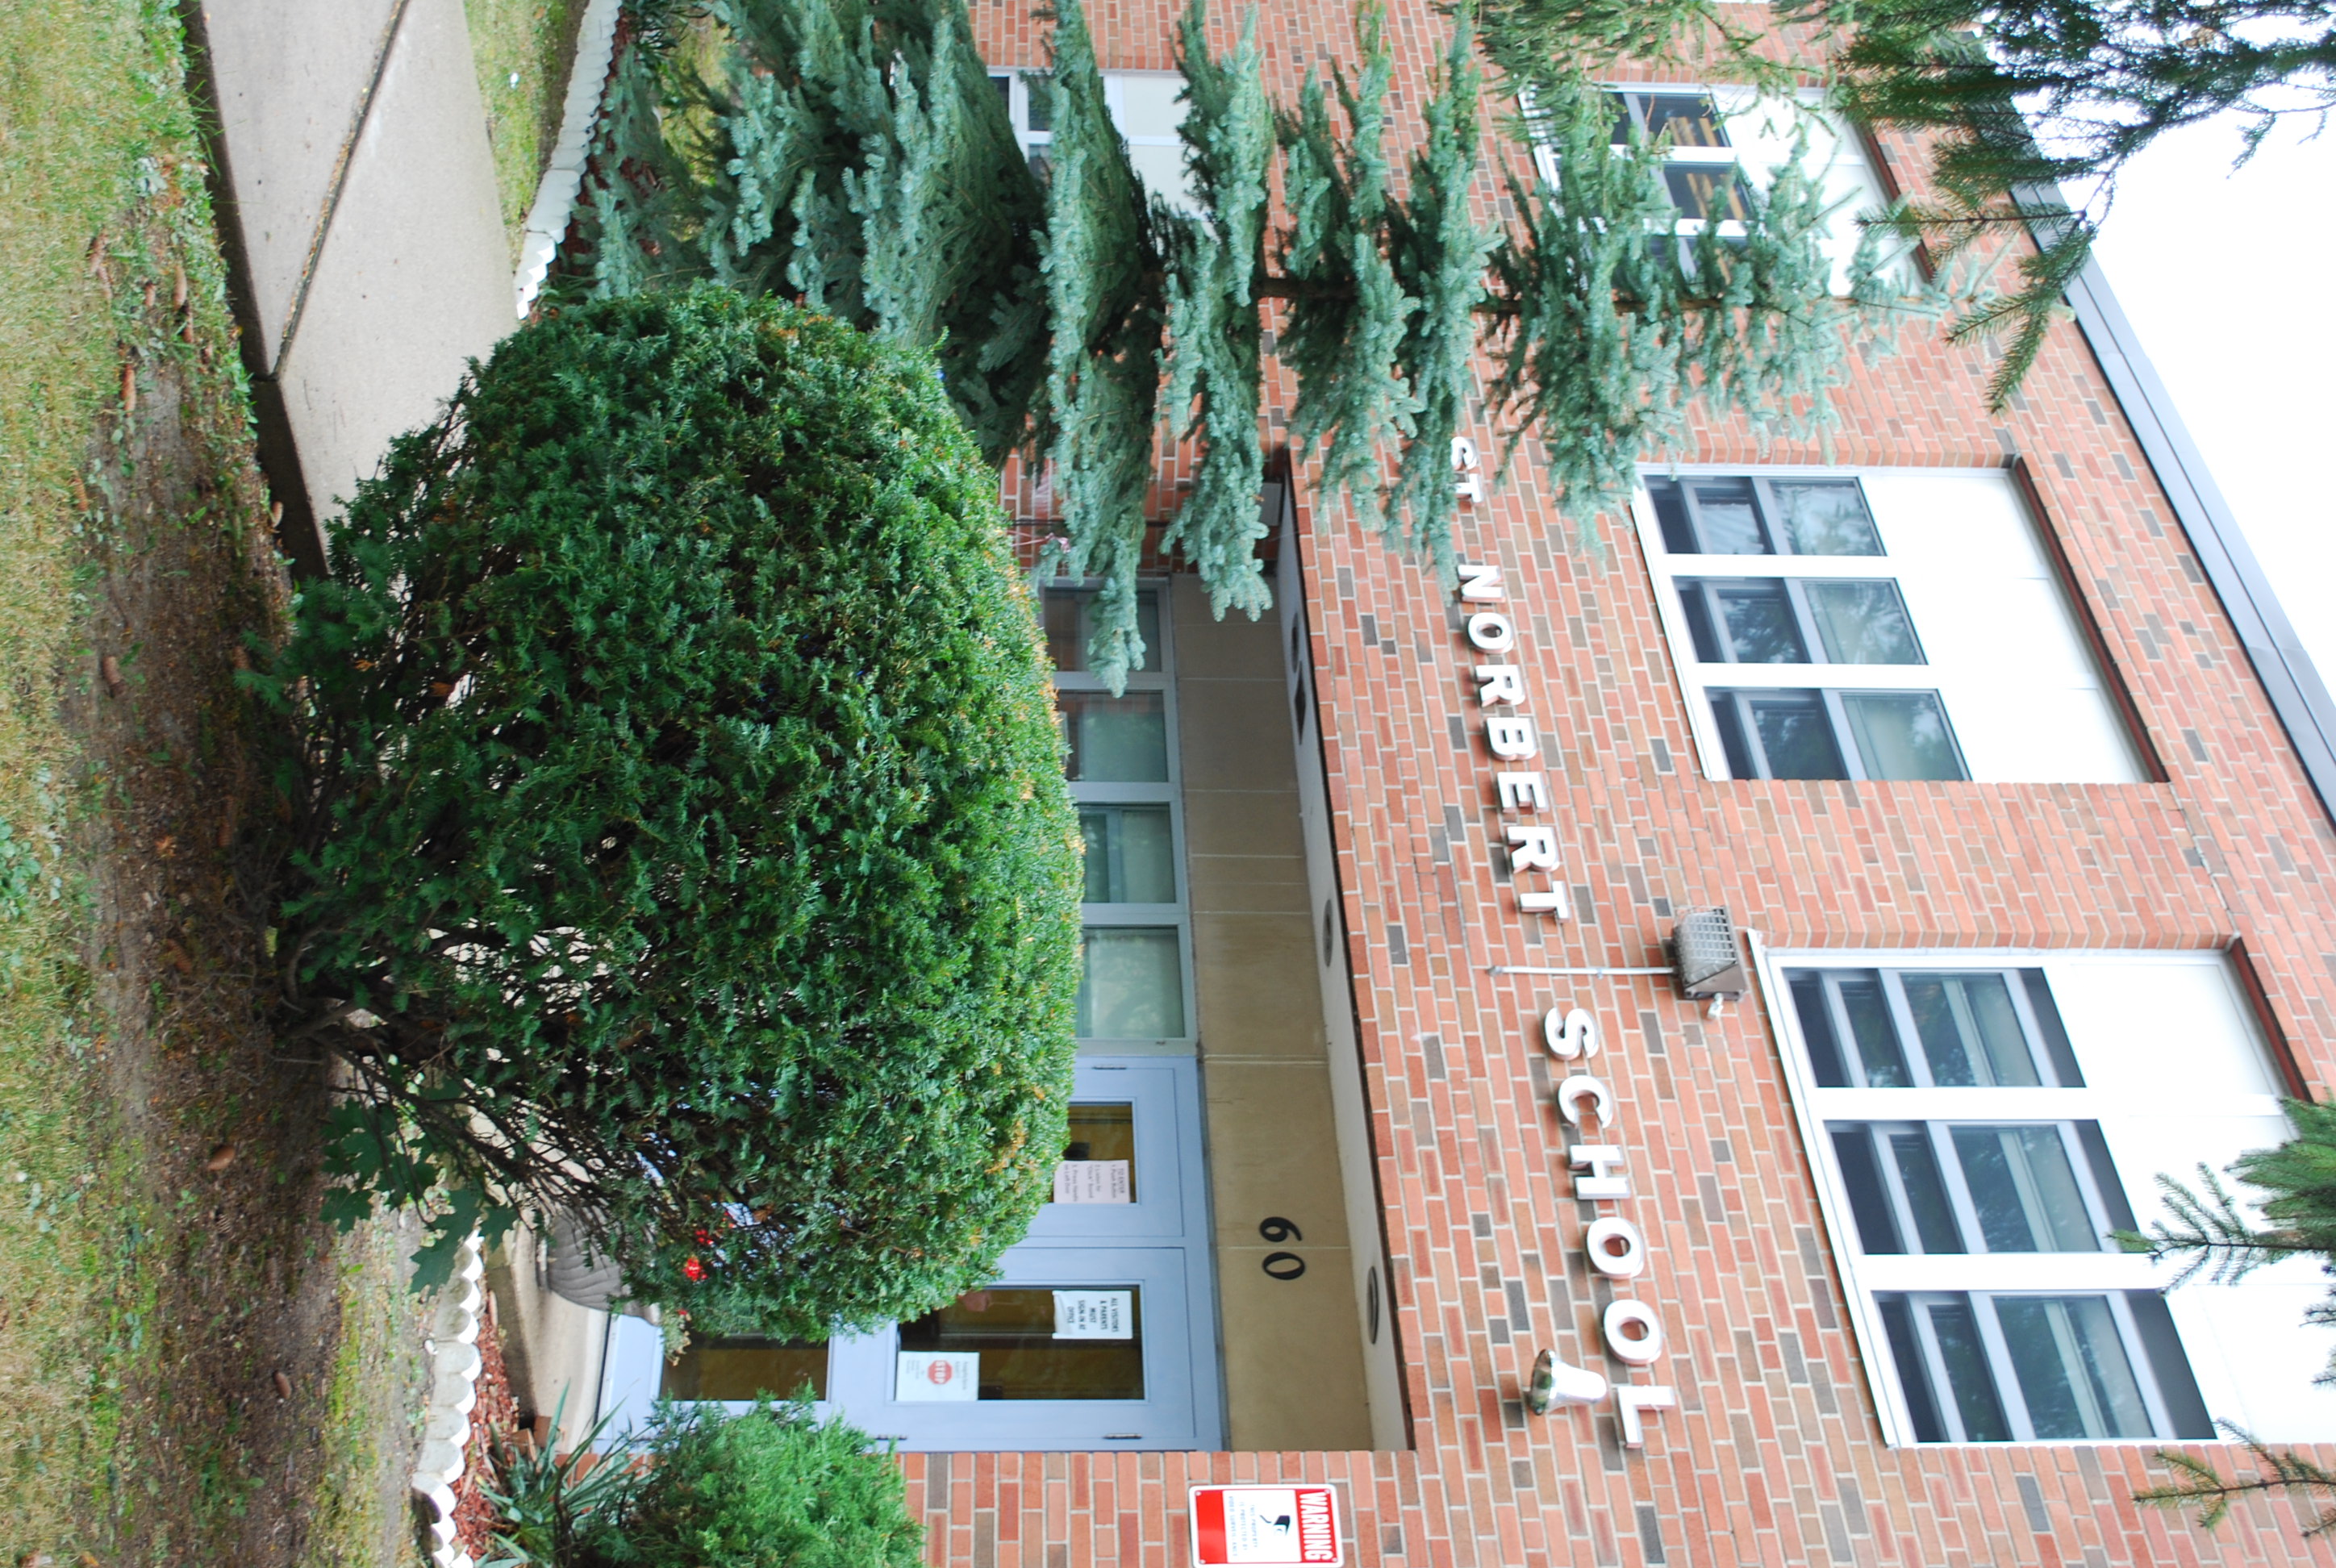 The front of the St. Norbert Catholic School building.